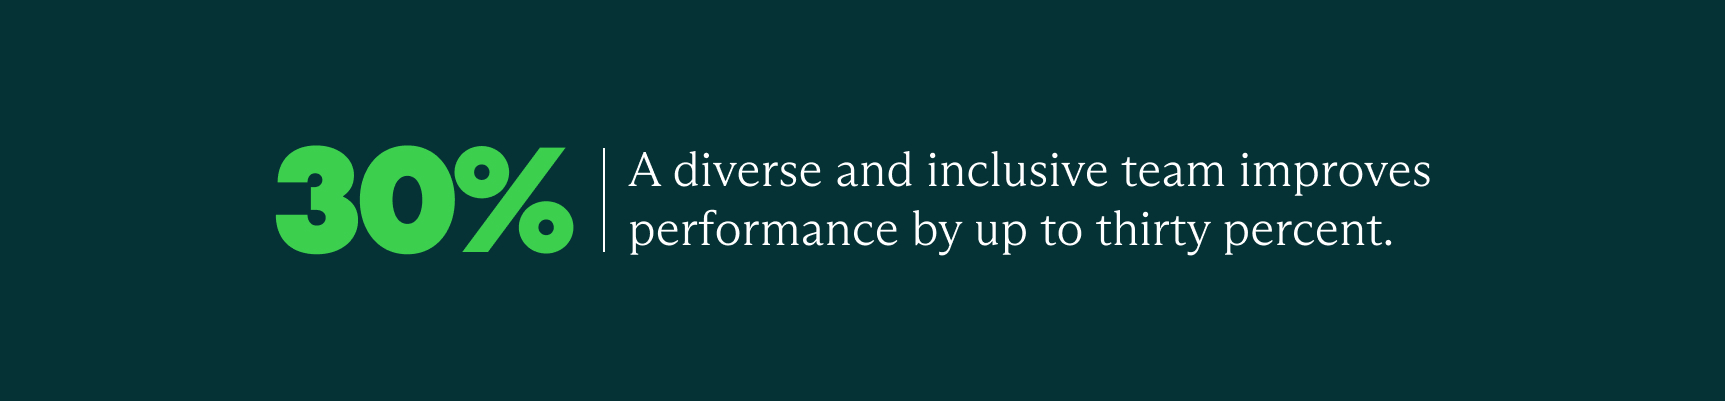 Companies with diverse and inclusive teams improve performance by 30%